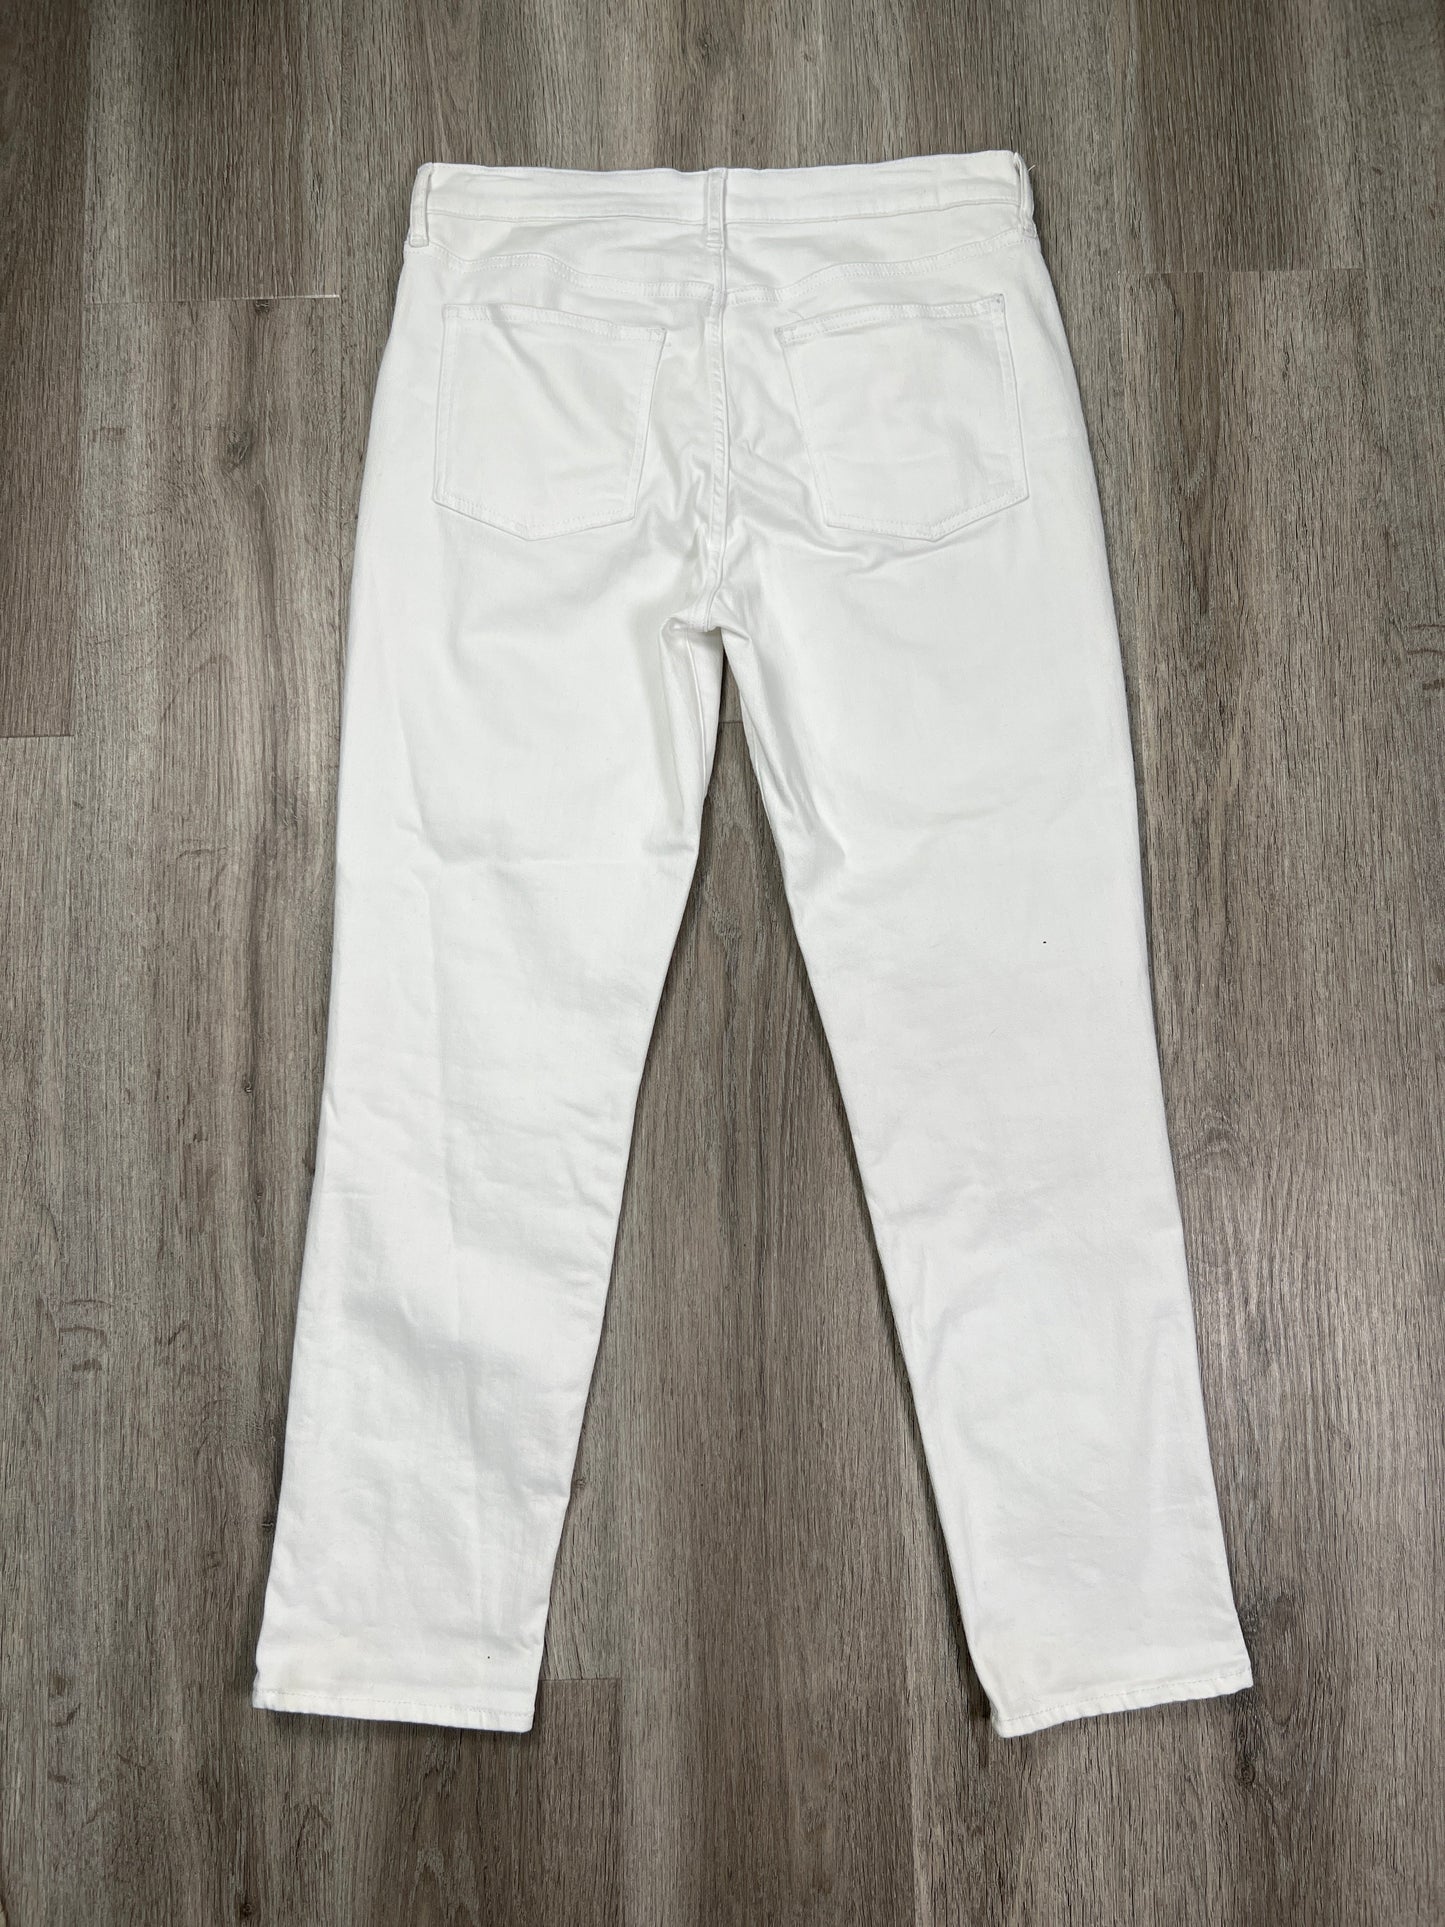 White Jeans Straight Gap, Size 8